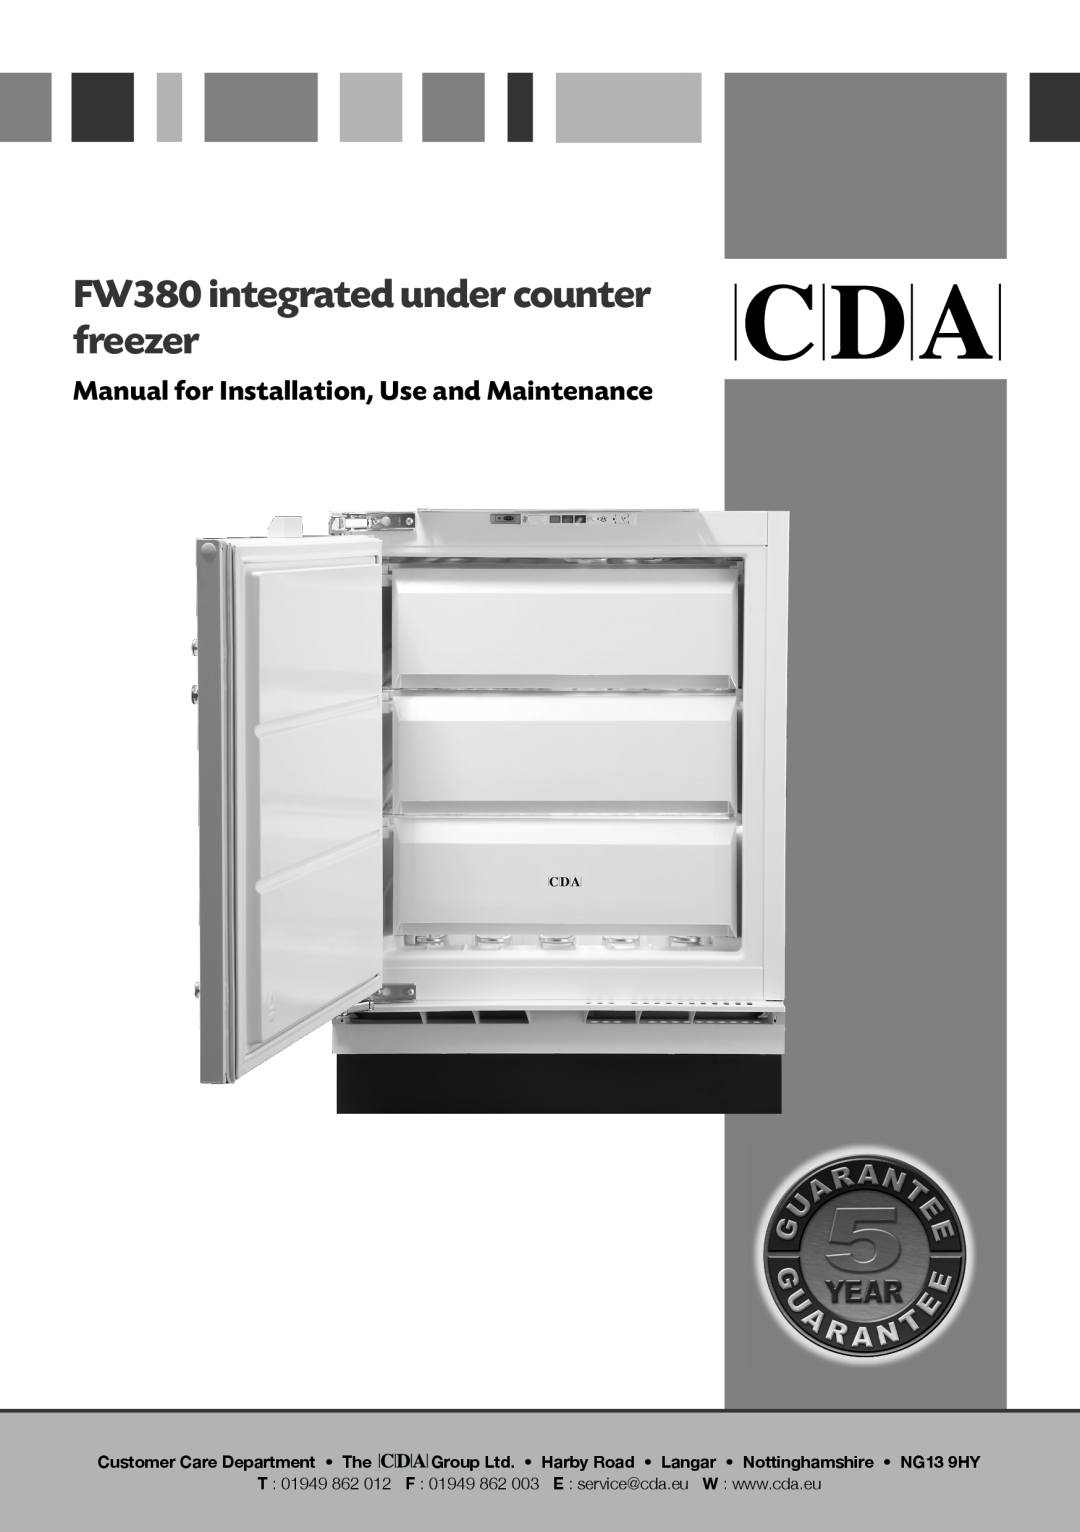 CDA manual FW380 integrated under counter freezer, Manual for Installation, Use and Maintenance, T 